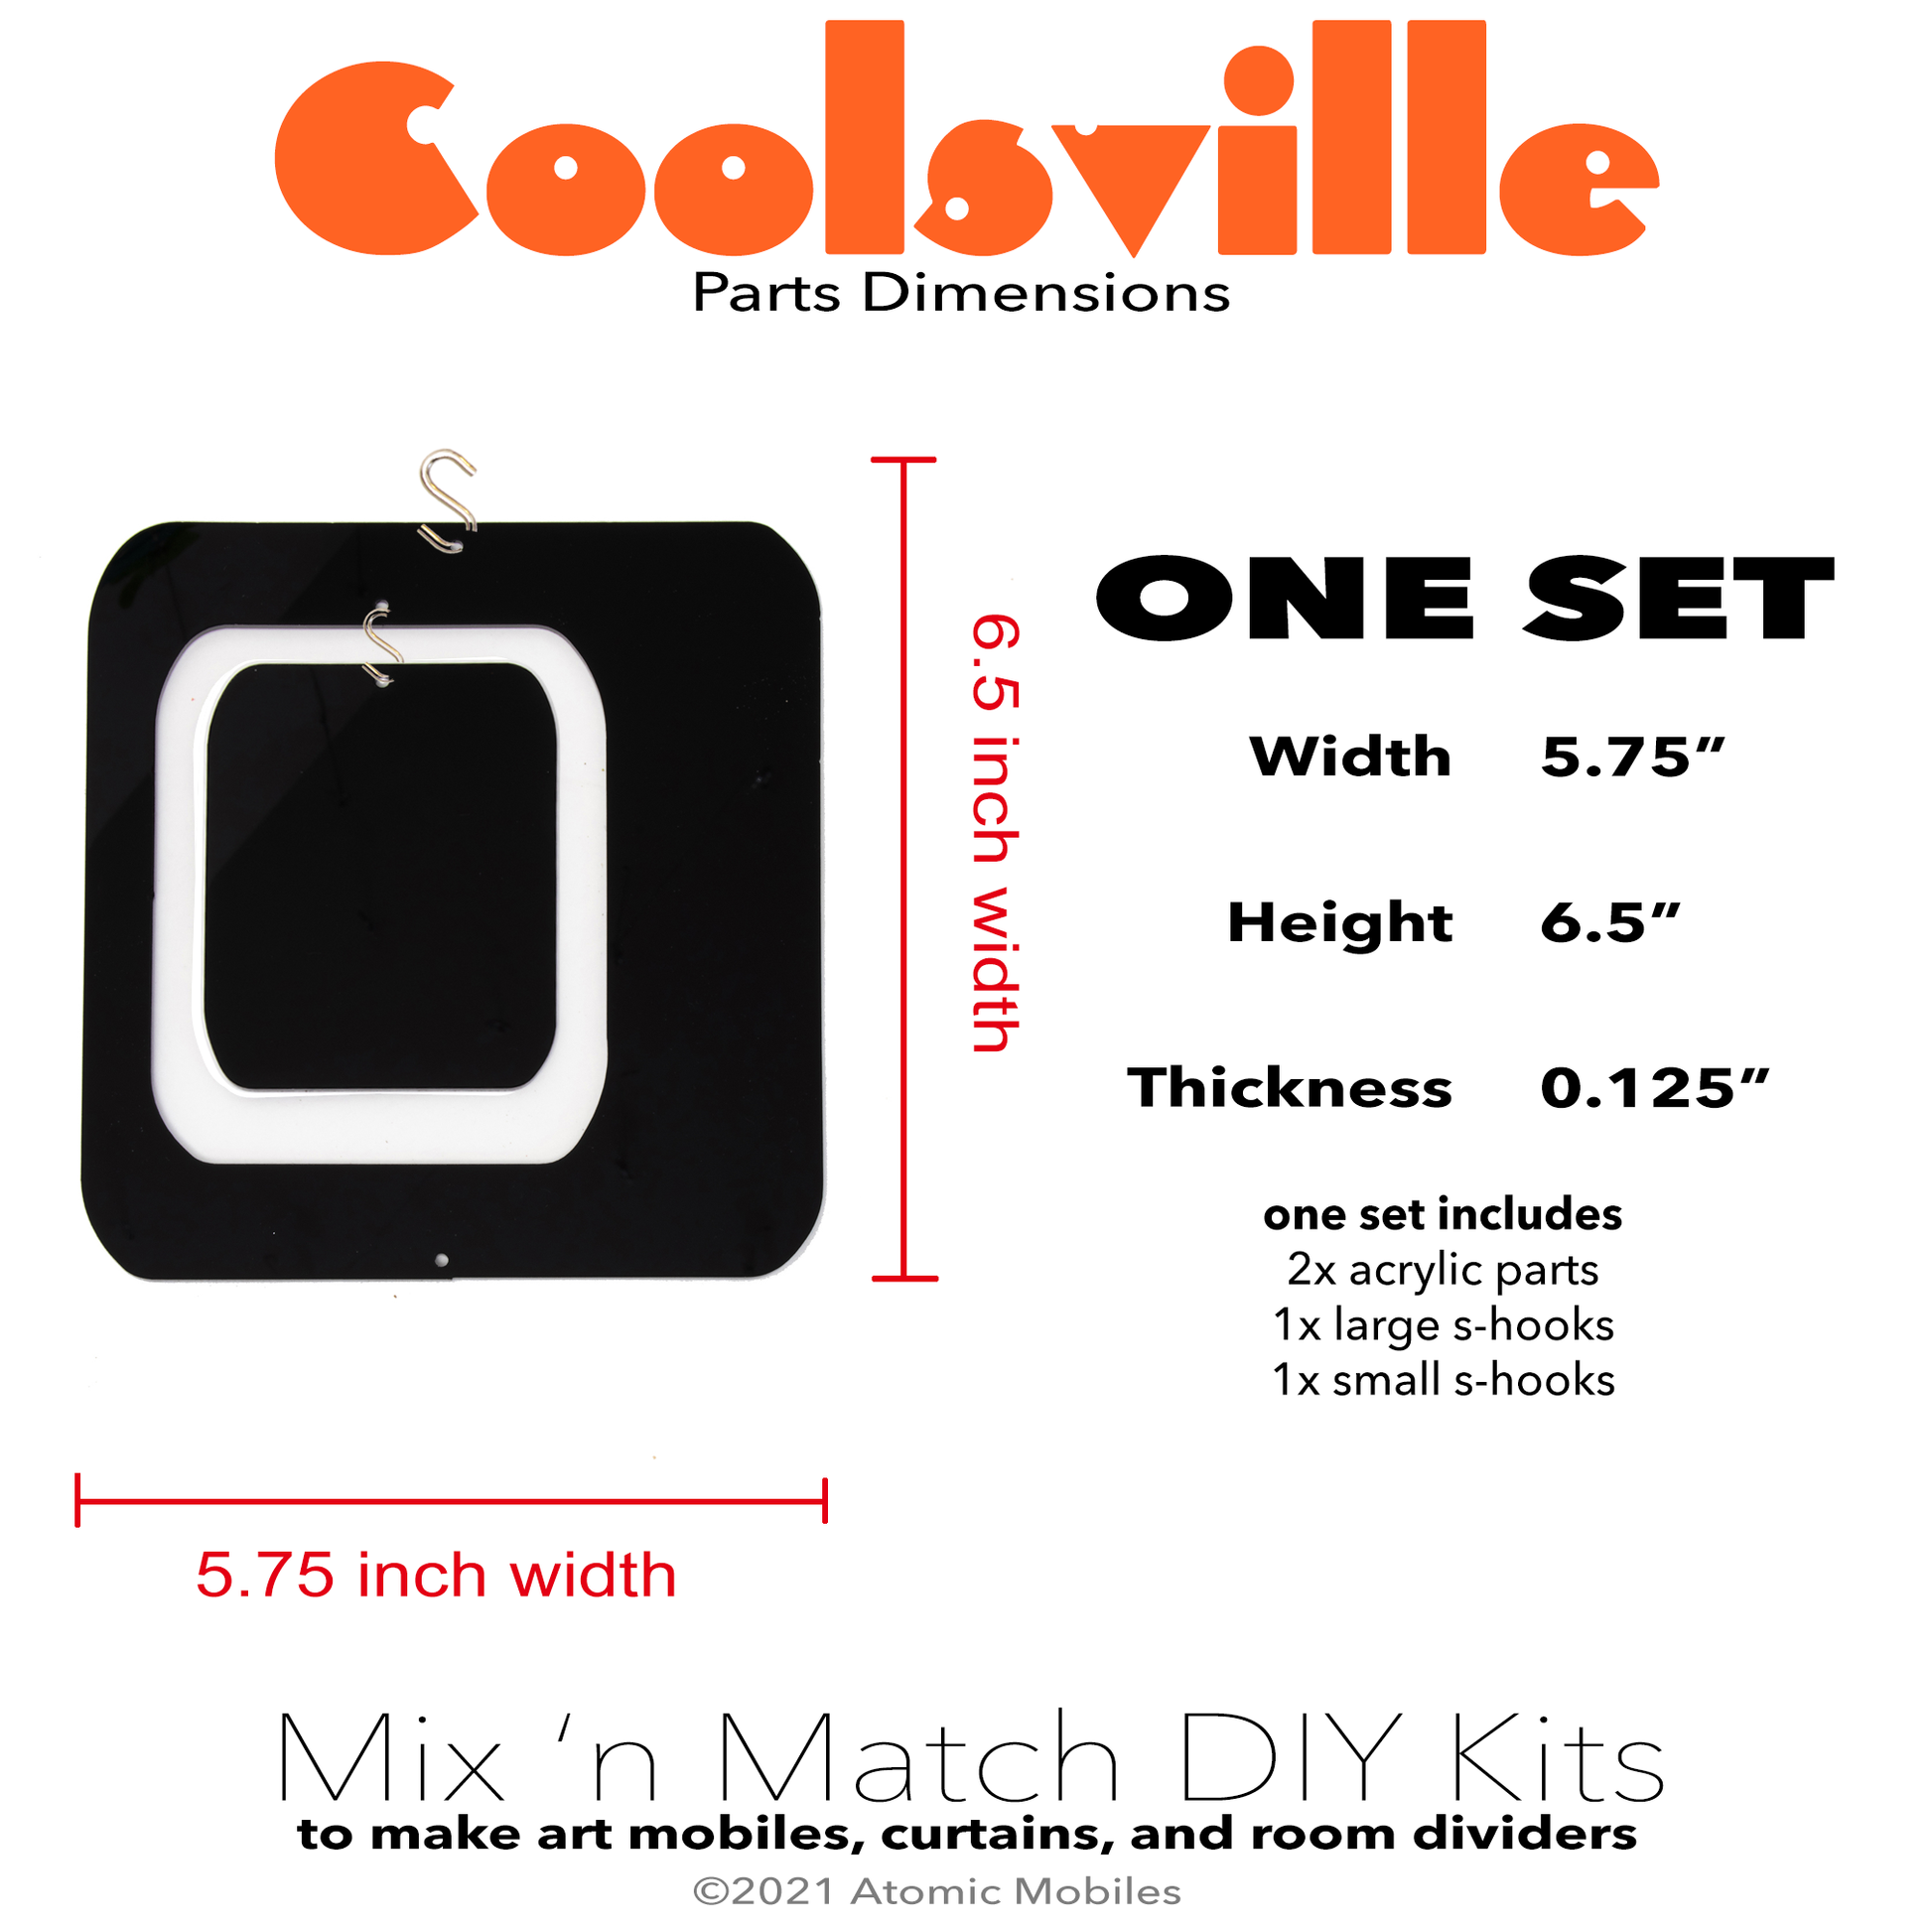 Coolsville Parts Dimensions for One Set for mix 'n match DIY kits to make hanging art mobiles, room dividers, and curtains by AtomicMobiles.com